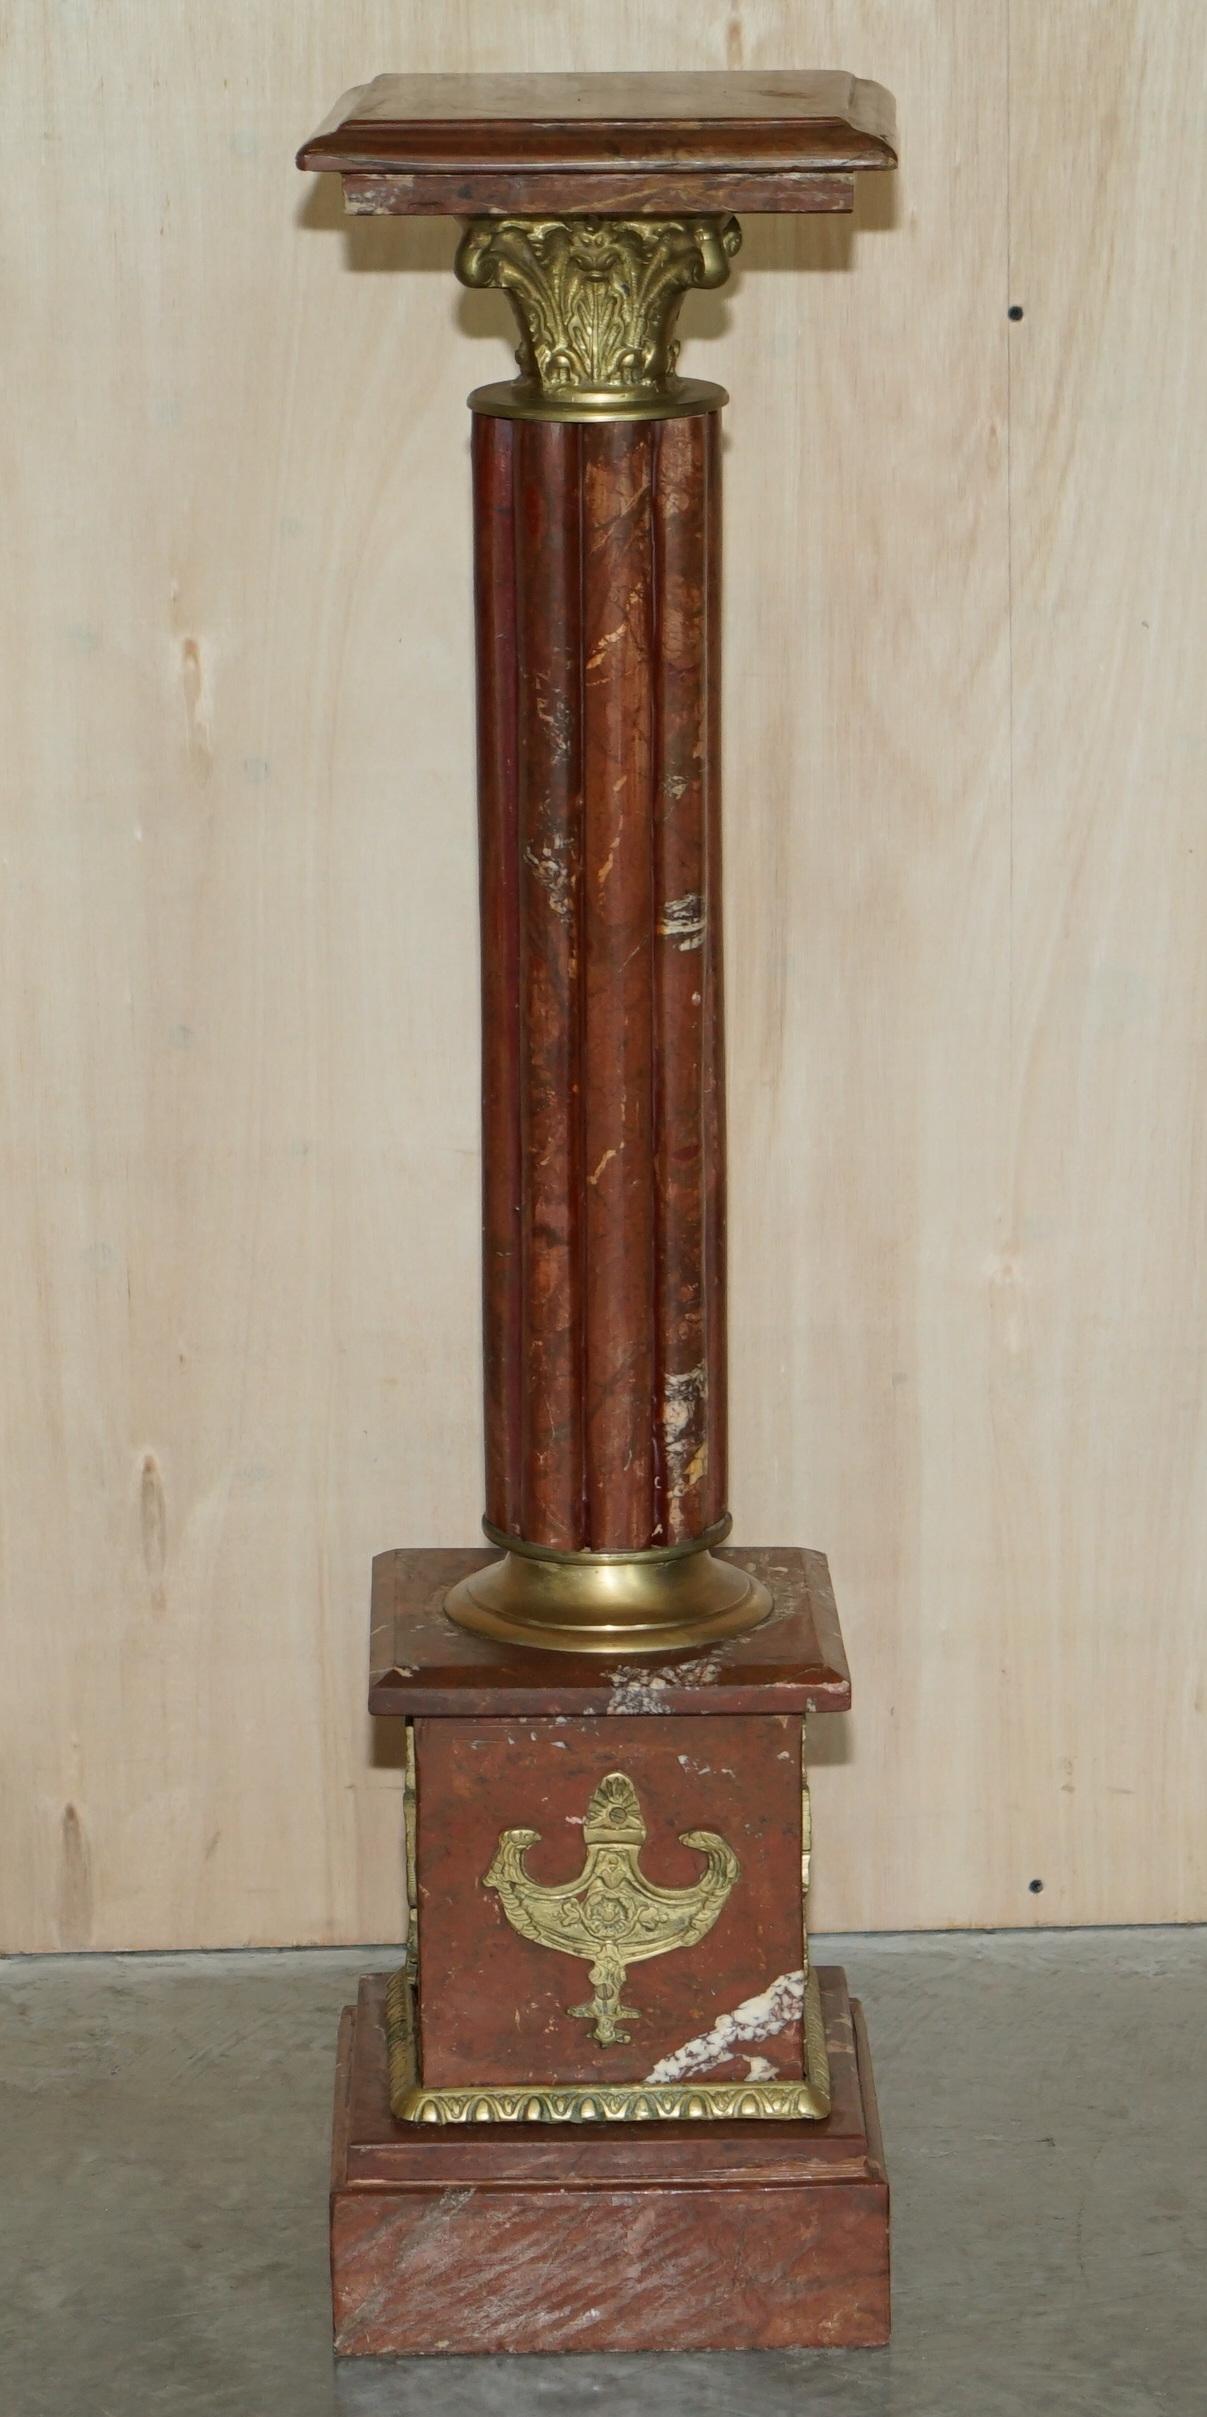 We are delighted to offer this exquisite antique circa 1880 French marble pillar pedestal with gold gilt brass accents

A very good looking and well made antique marble pillar. This piece is as good and honest as they come, it has the original